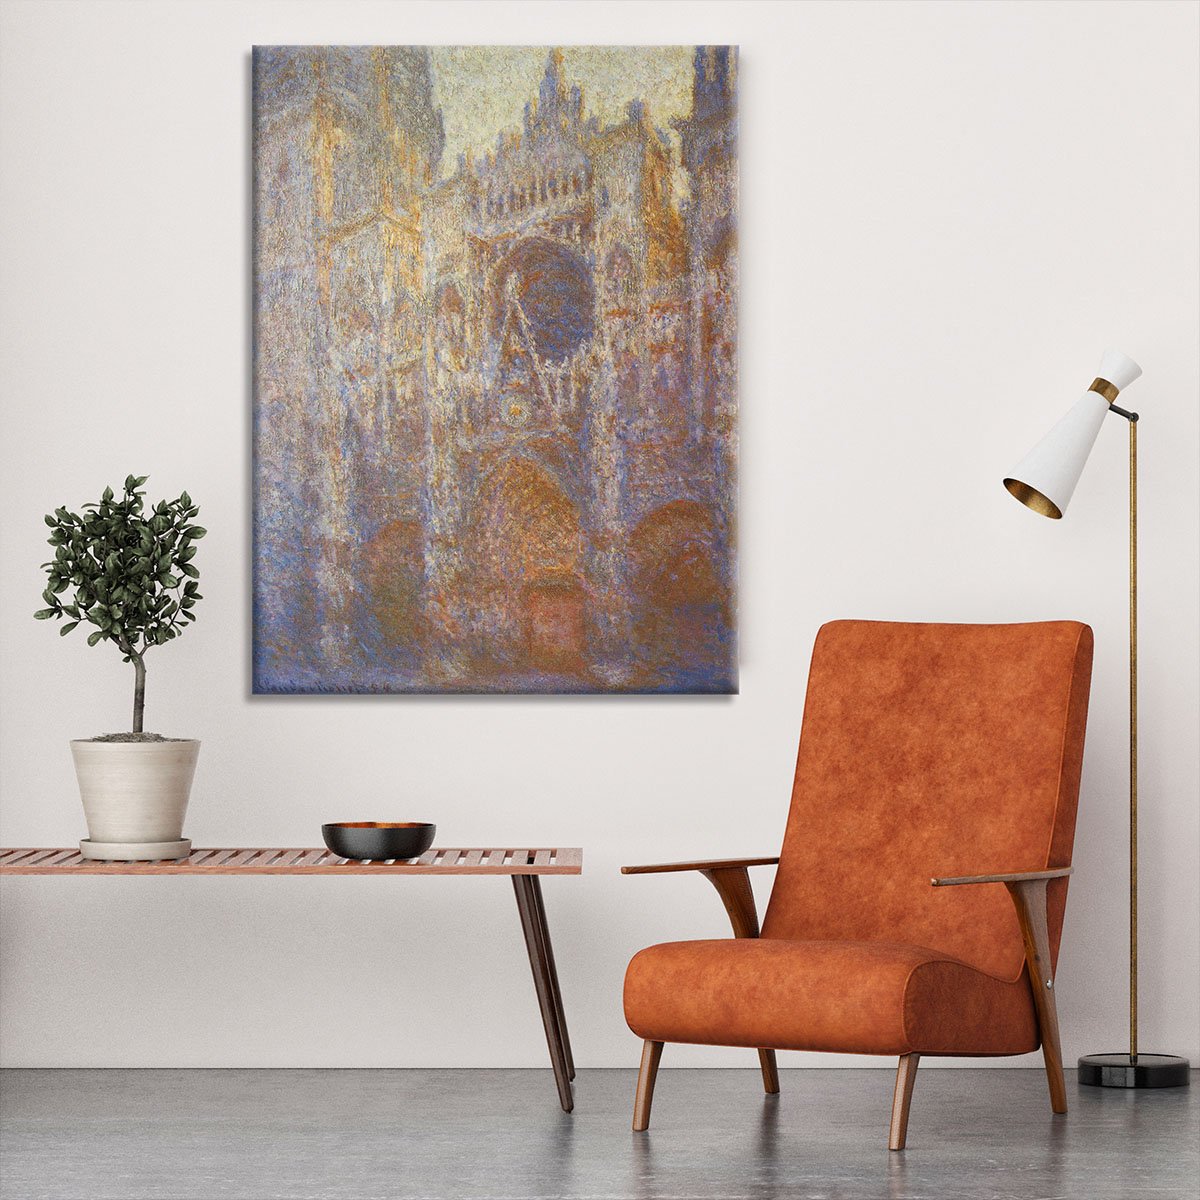 The Rouen Cathedral West facade by Monet Canvas Print or Poster